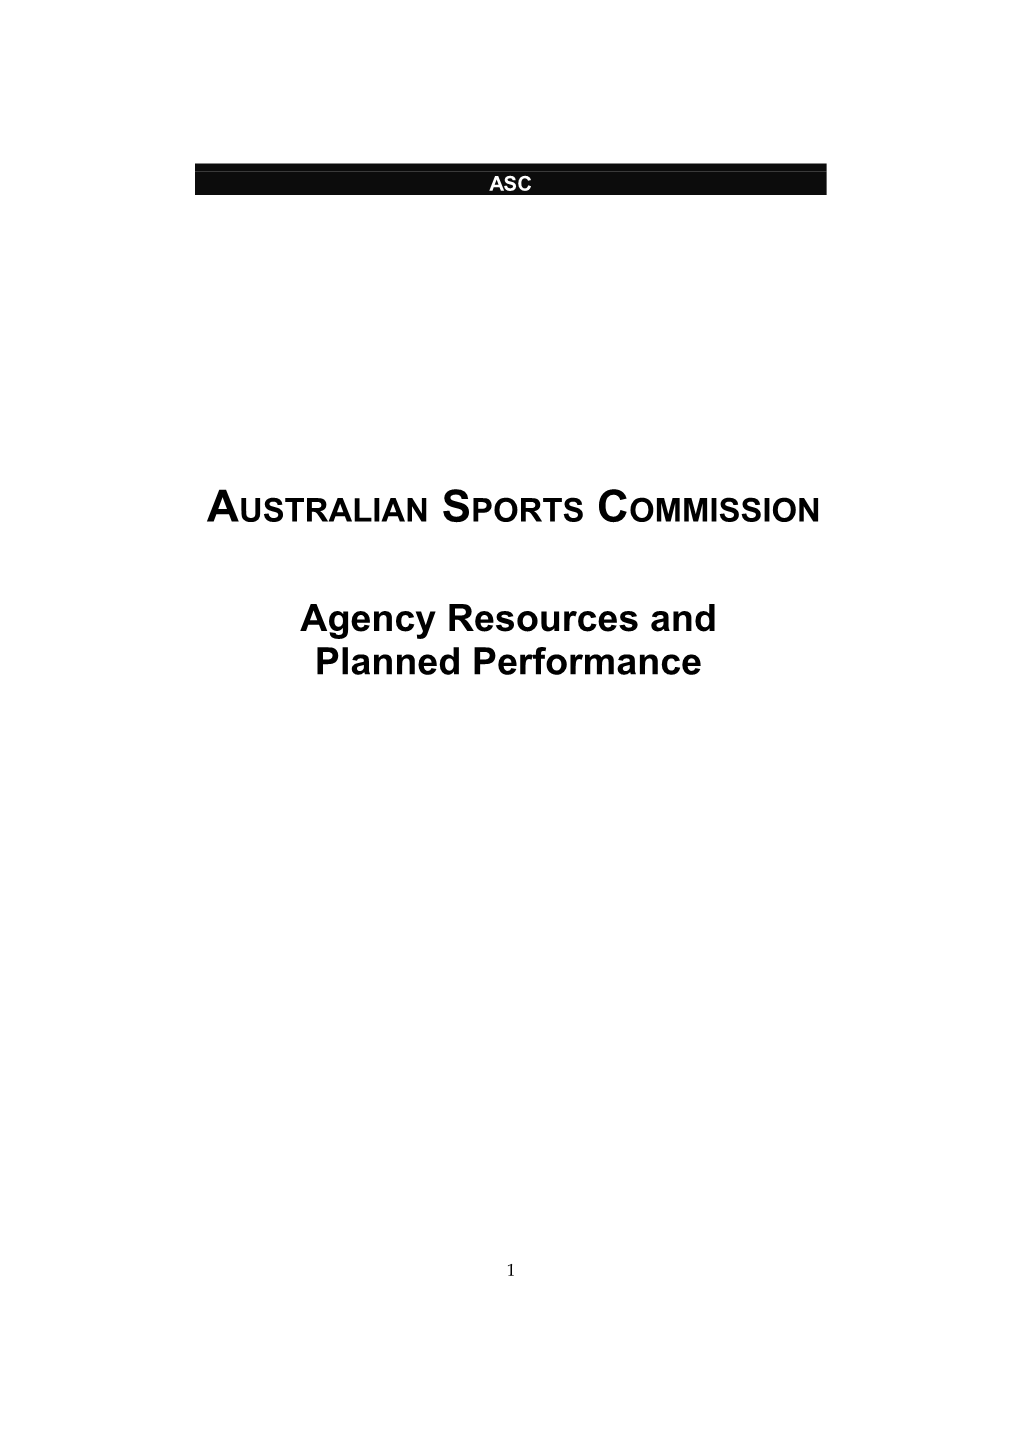 AUSTRALIAN SPORTS COMMISSION Agency Resources and Planned Performance